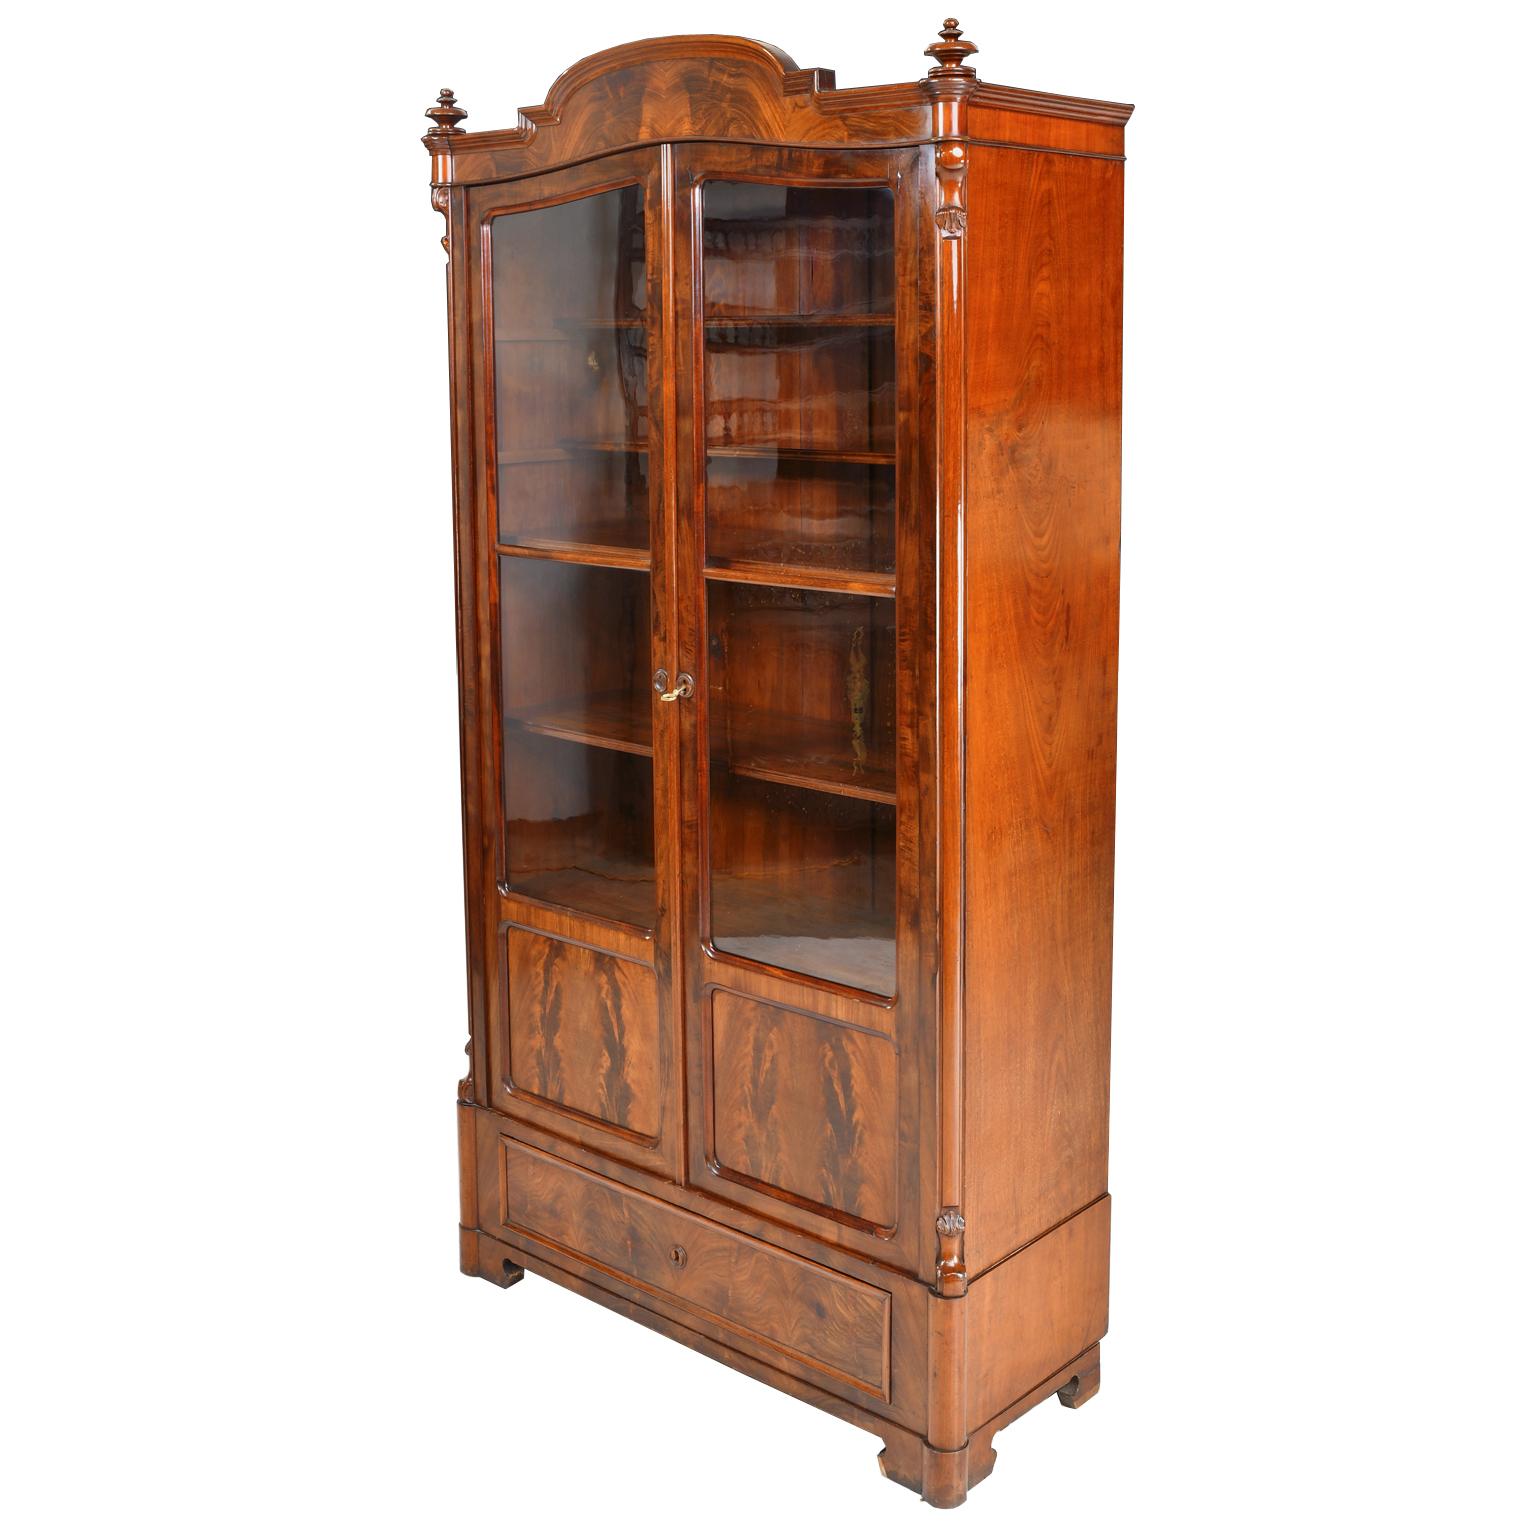 A beautiful Louis Philippe bookcase in fine Cuban/ West Indies mahogany with arched bonnet top over two doors, with original glass panels, that open to adjustable shelving. Cabinet offers one exterior drawer along the bottom and rests on original